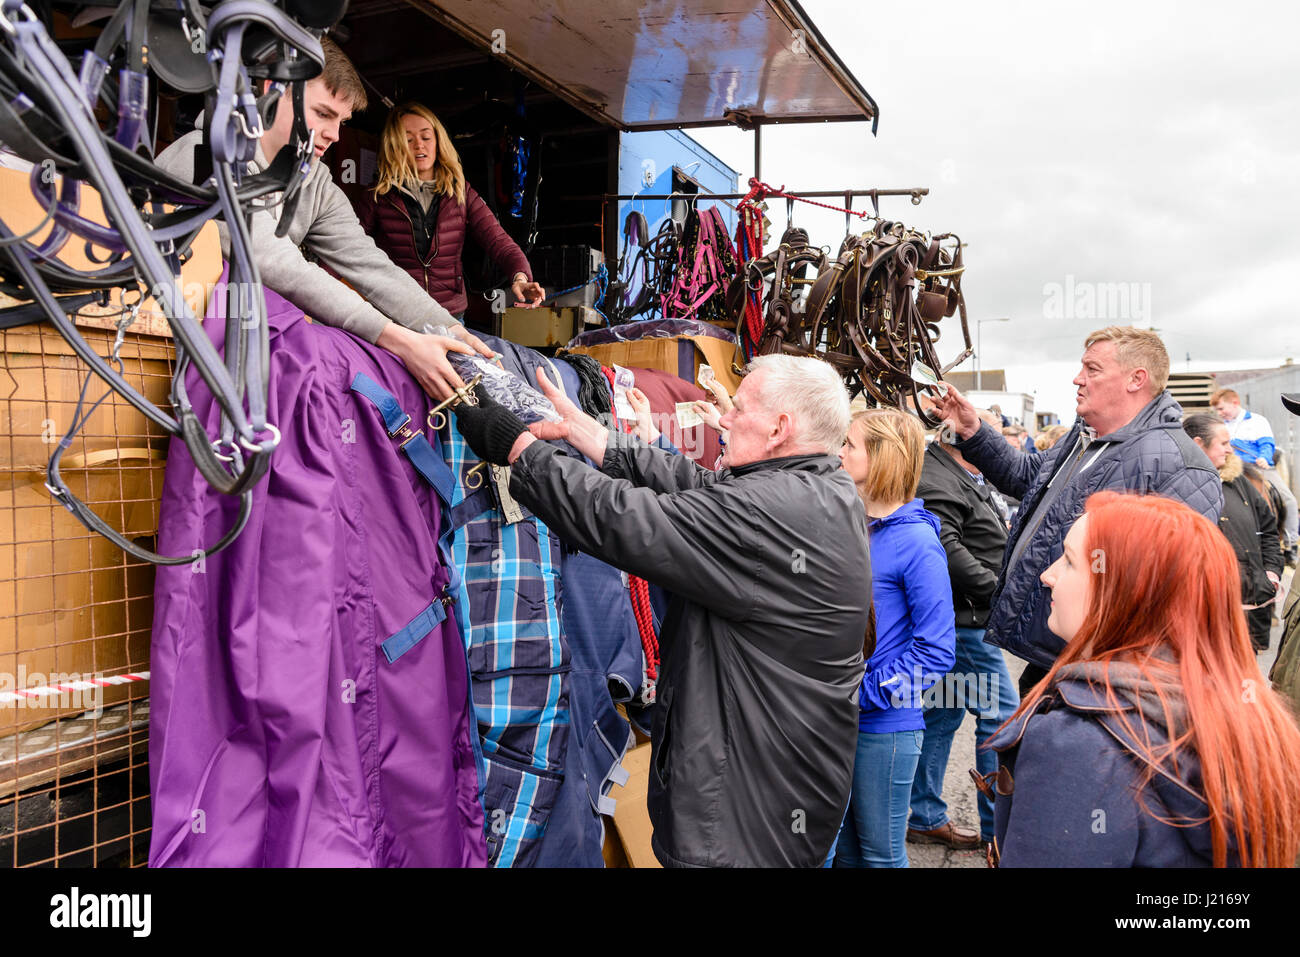 Customers hand over money at an auction for horse equipment at the Toome Horse Fair, Northern Ireland Stock Photo